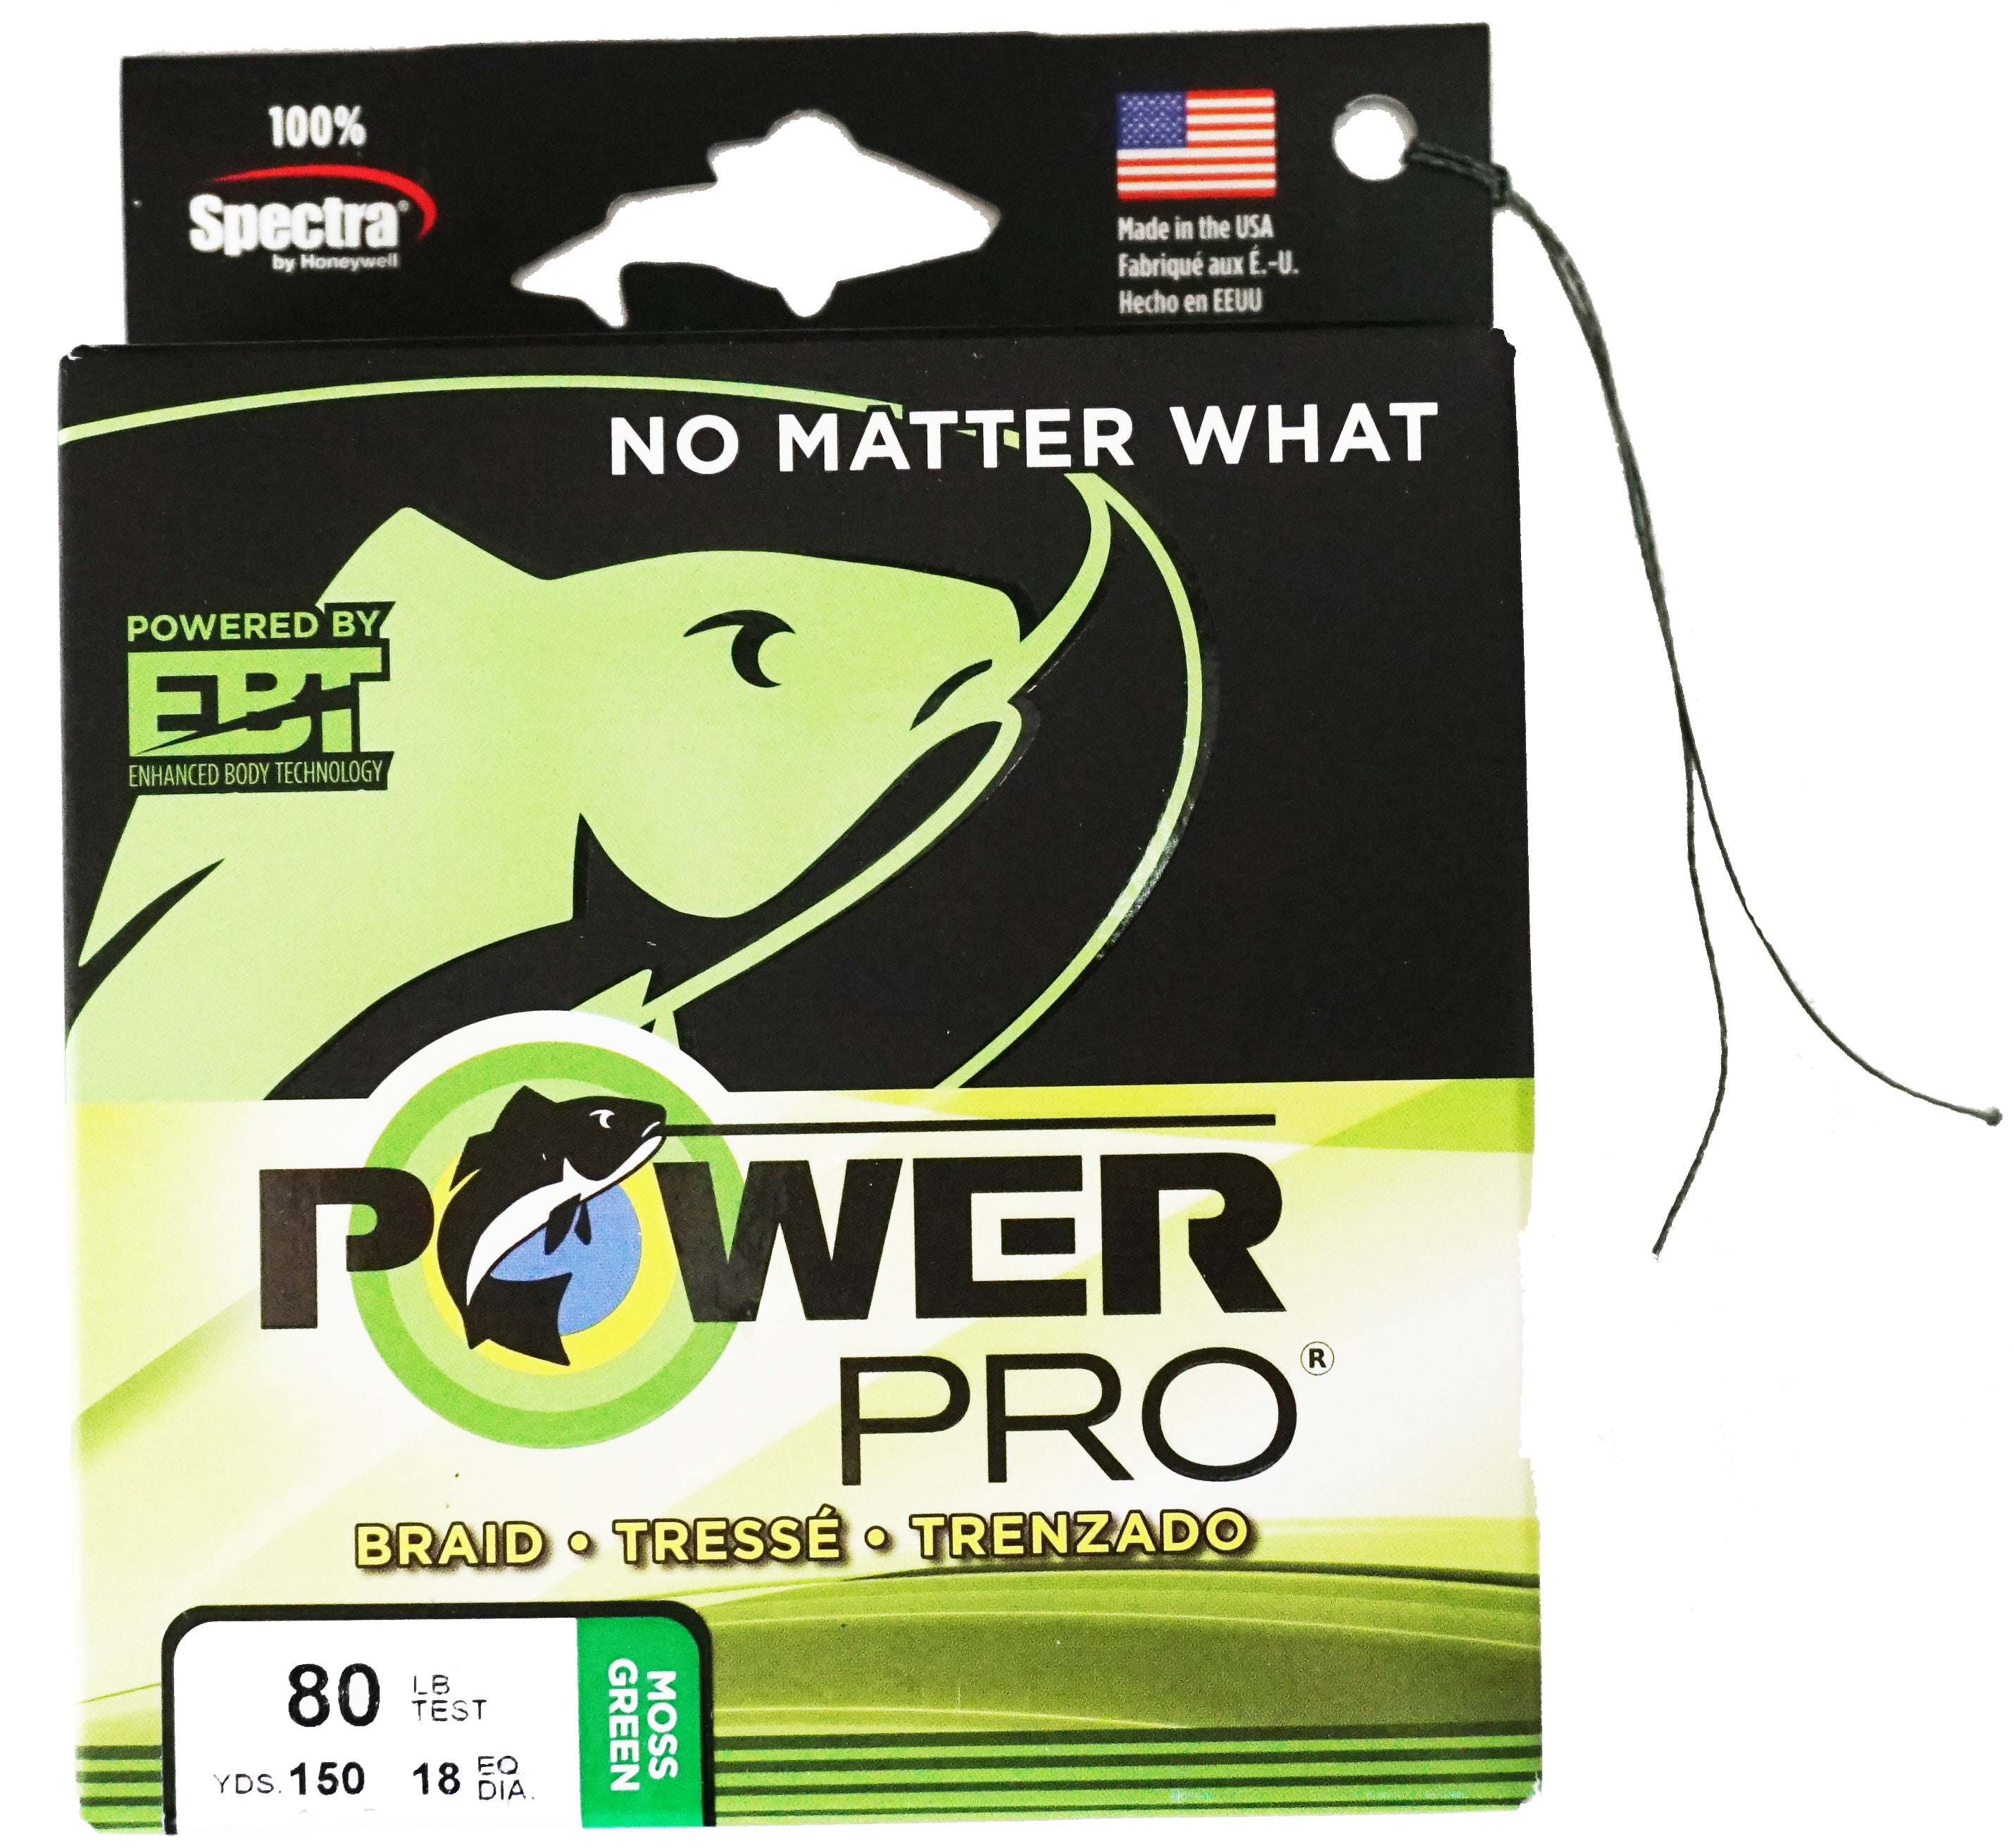 Best Braided Fishing Lines - Power Pro, Sufix & More